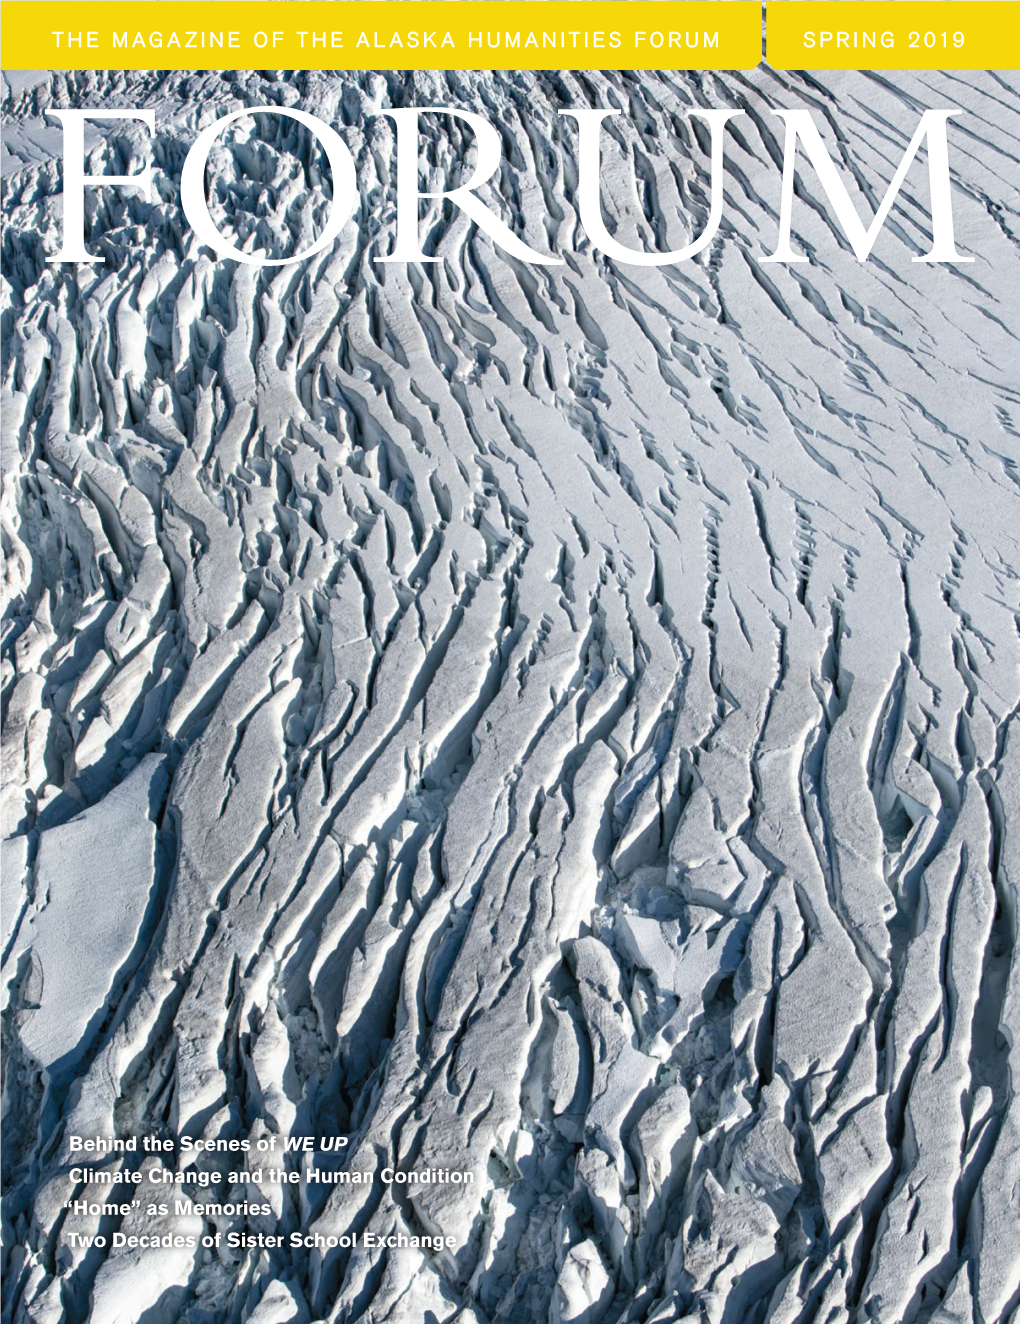 SPRING 2019 the MAGAZINE of the ALASKA HUMANITIES FORUM Behind the Scenes of WE up Climate Change and the Human Condition “Hom